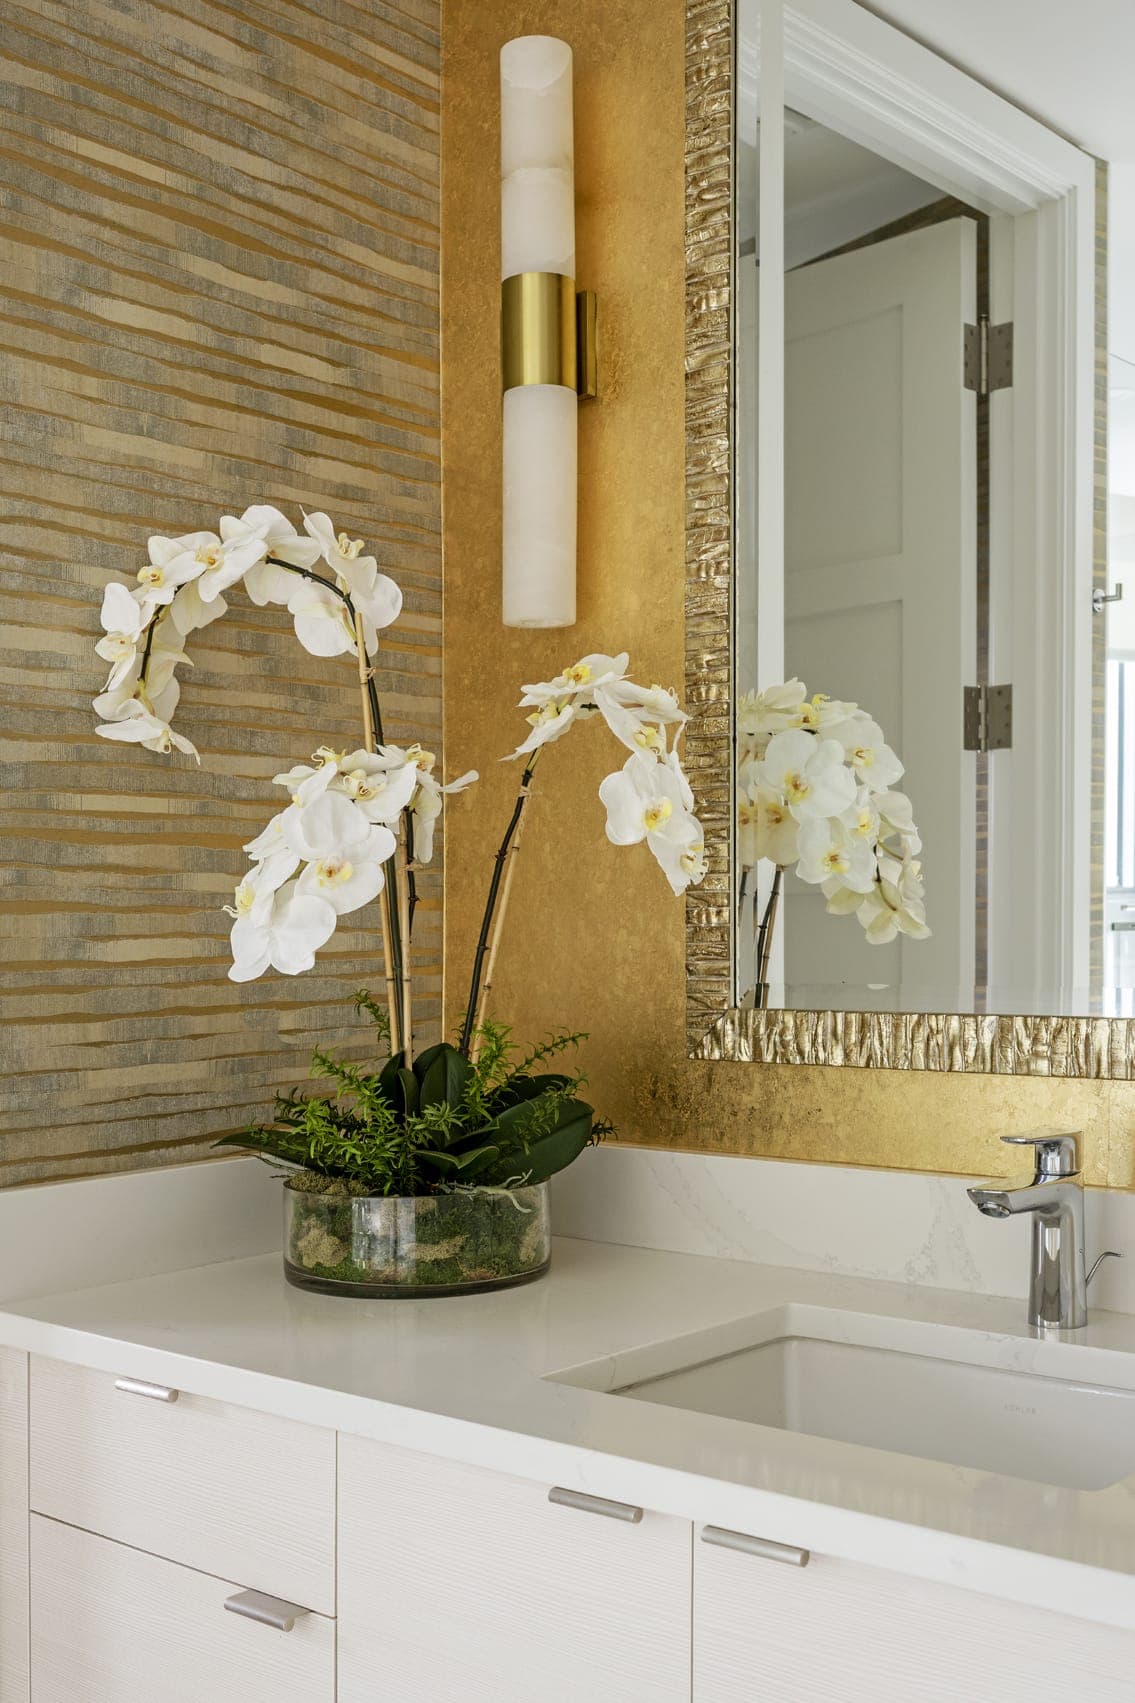 Bathroom Sink Gold Wall With Light Pendant White Orchids